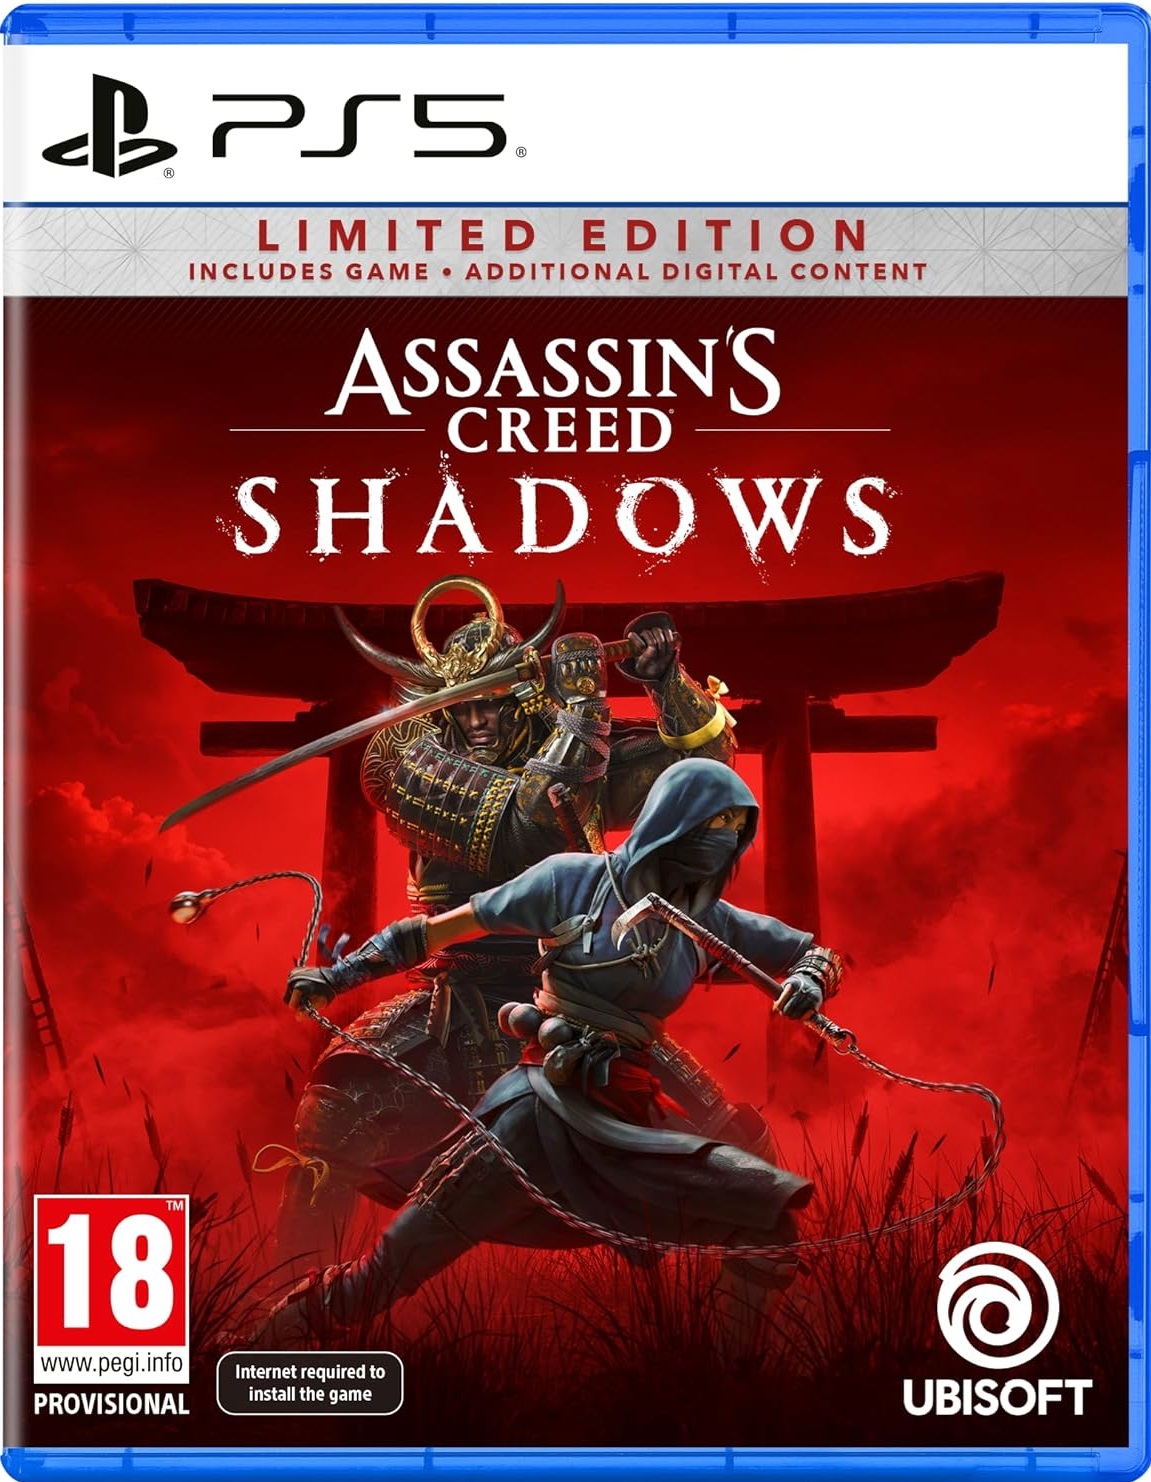 Assassin's Creed Shadows Limited Edition - PS5